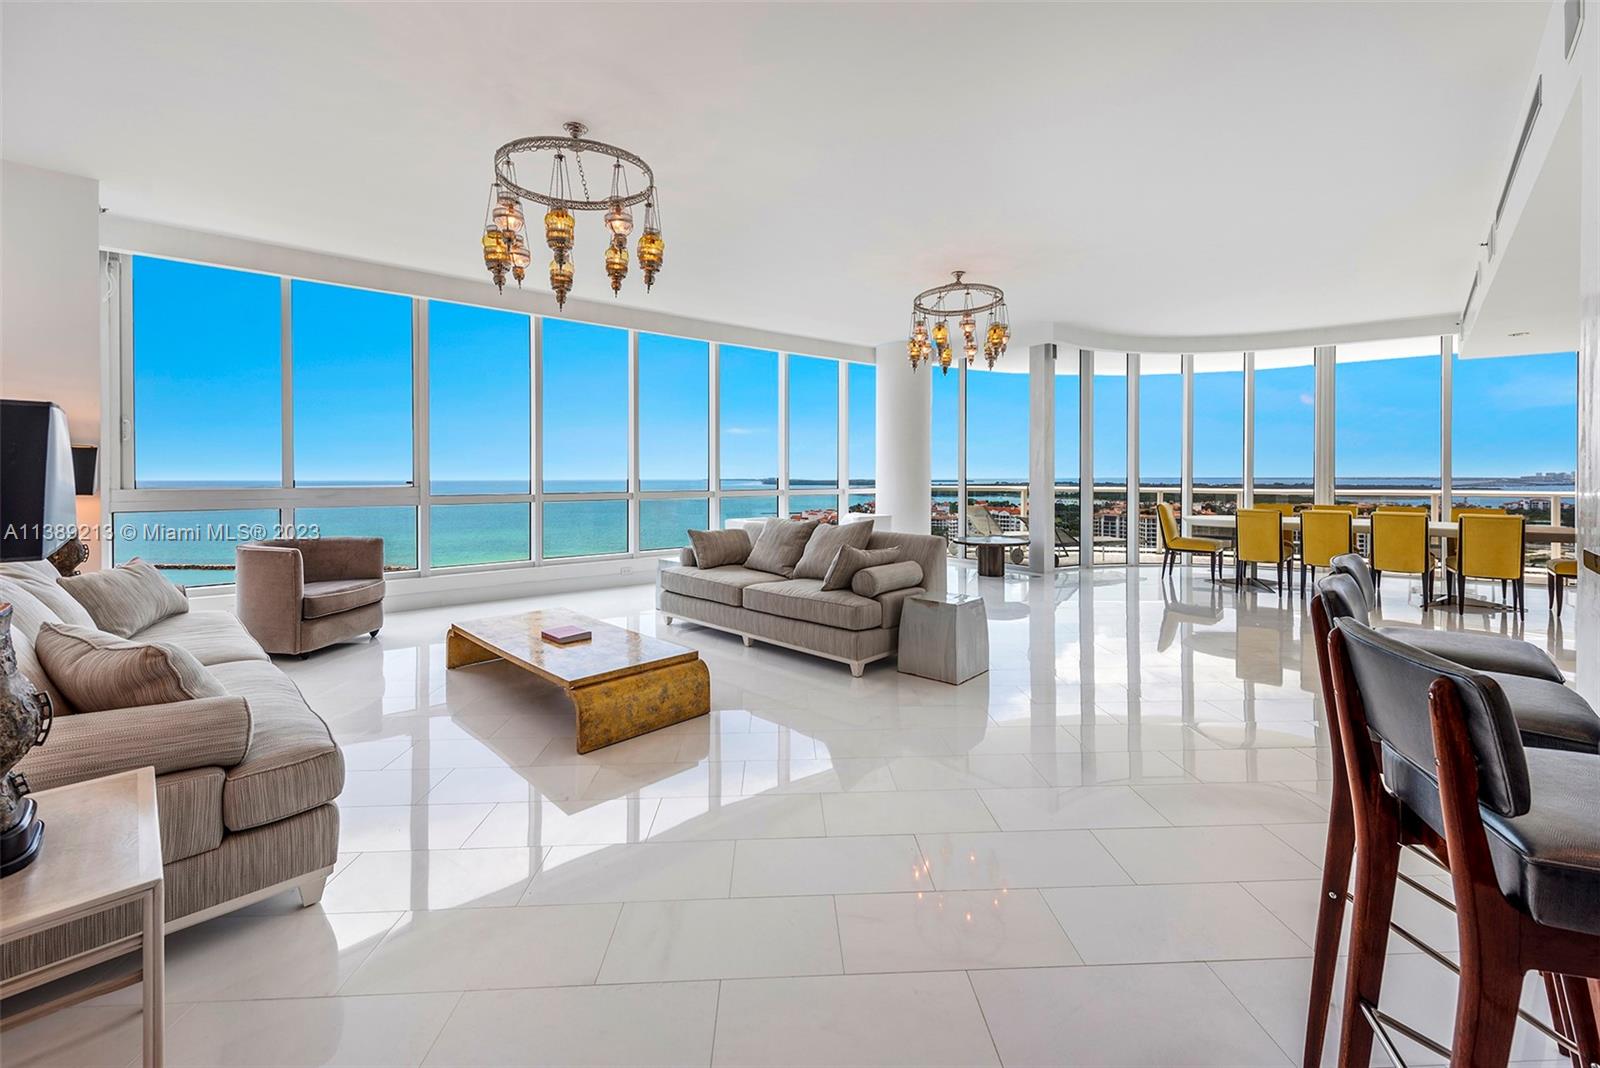 Stunning 4,776 square foot unit boasts over 180 degrees of breathtaking panoramic views of the Atlantic Ocean, Fisher Island, and Miami skyline. Featuring three large bedrooms, two offices, media room and open plan living. In addition sold separately is a beach front cabana #5 asking $2,750,000. Continuum offers unparalleled luxury amenities on 13.5 acres, so enjoy luxurious resort style living including full-service spa, fitness center, 3 swimming pools, private beach access. Building offers 24-hour concierge service and guard gate, ensuring the utmost privacy and security. Located in Miami Beach's prestigious South of Fifth neighborhood, Continuum is just steps away from world-class restaurants, designer shops, and cultural attractions.